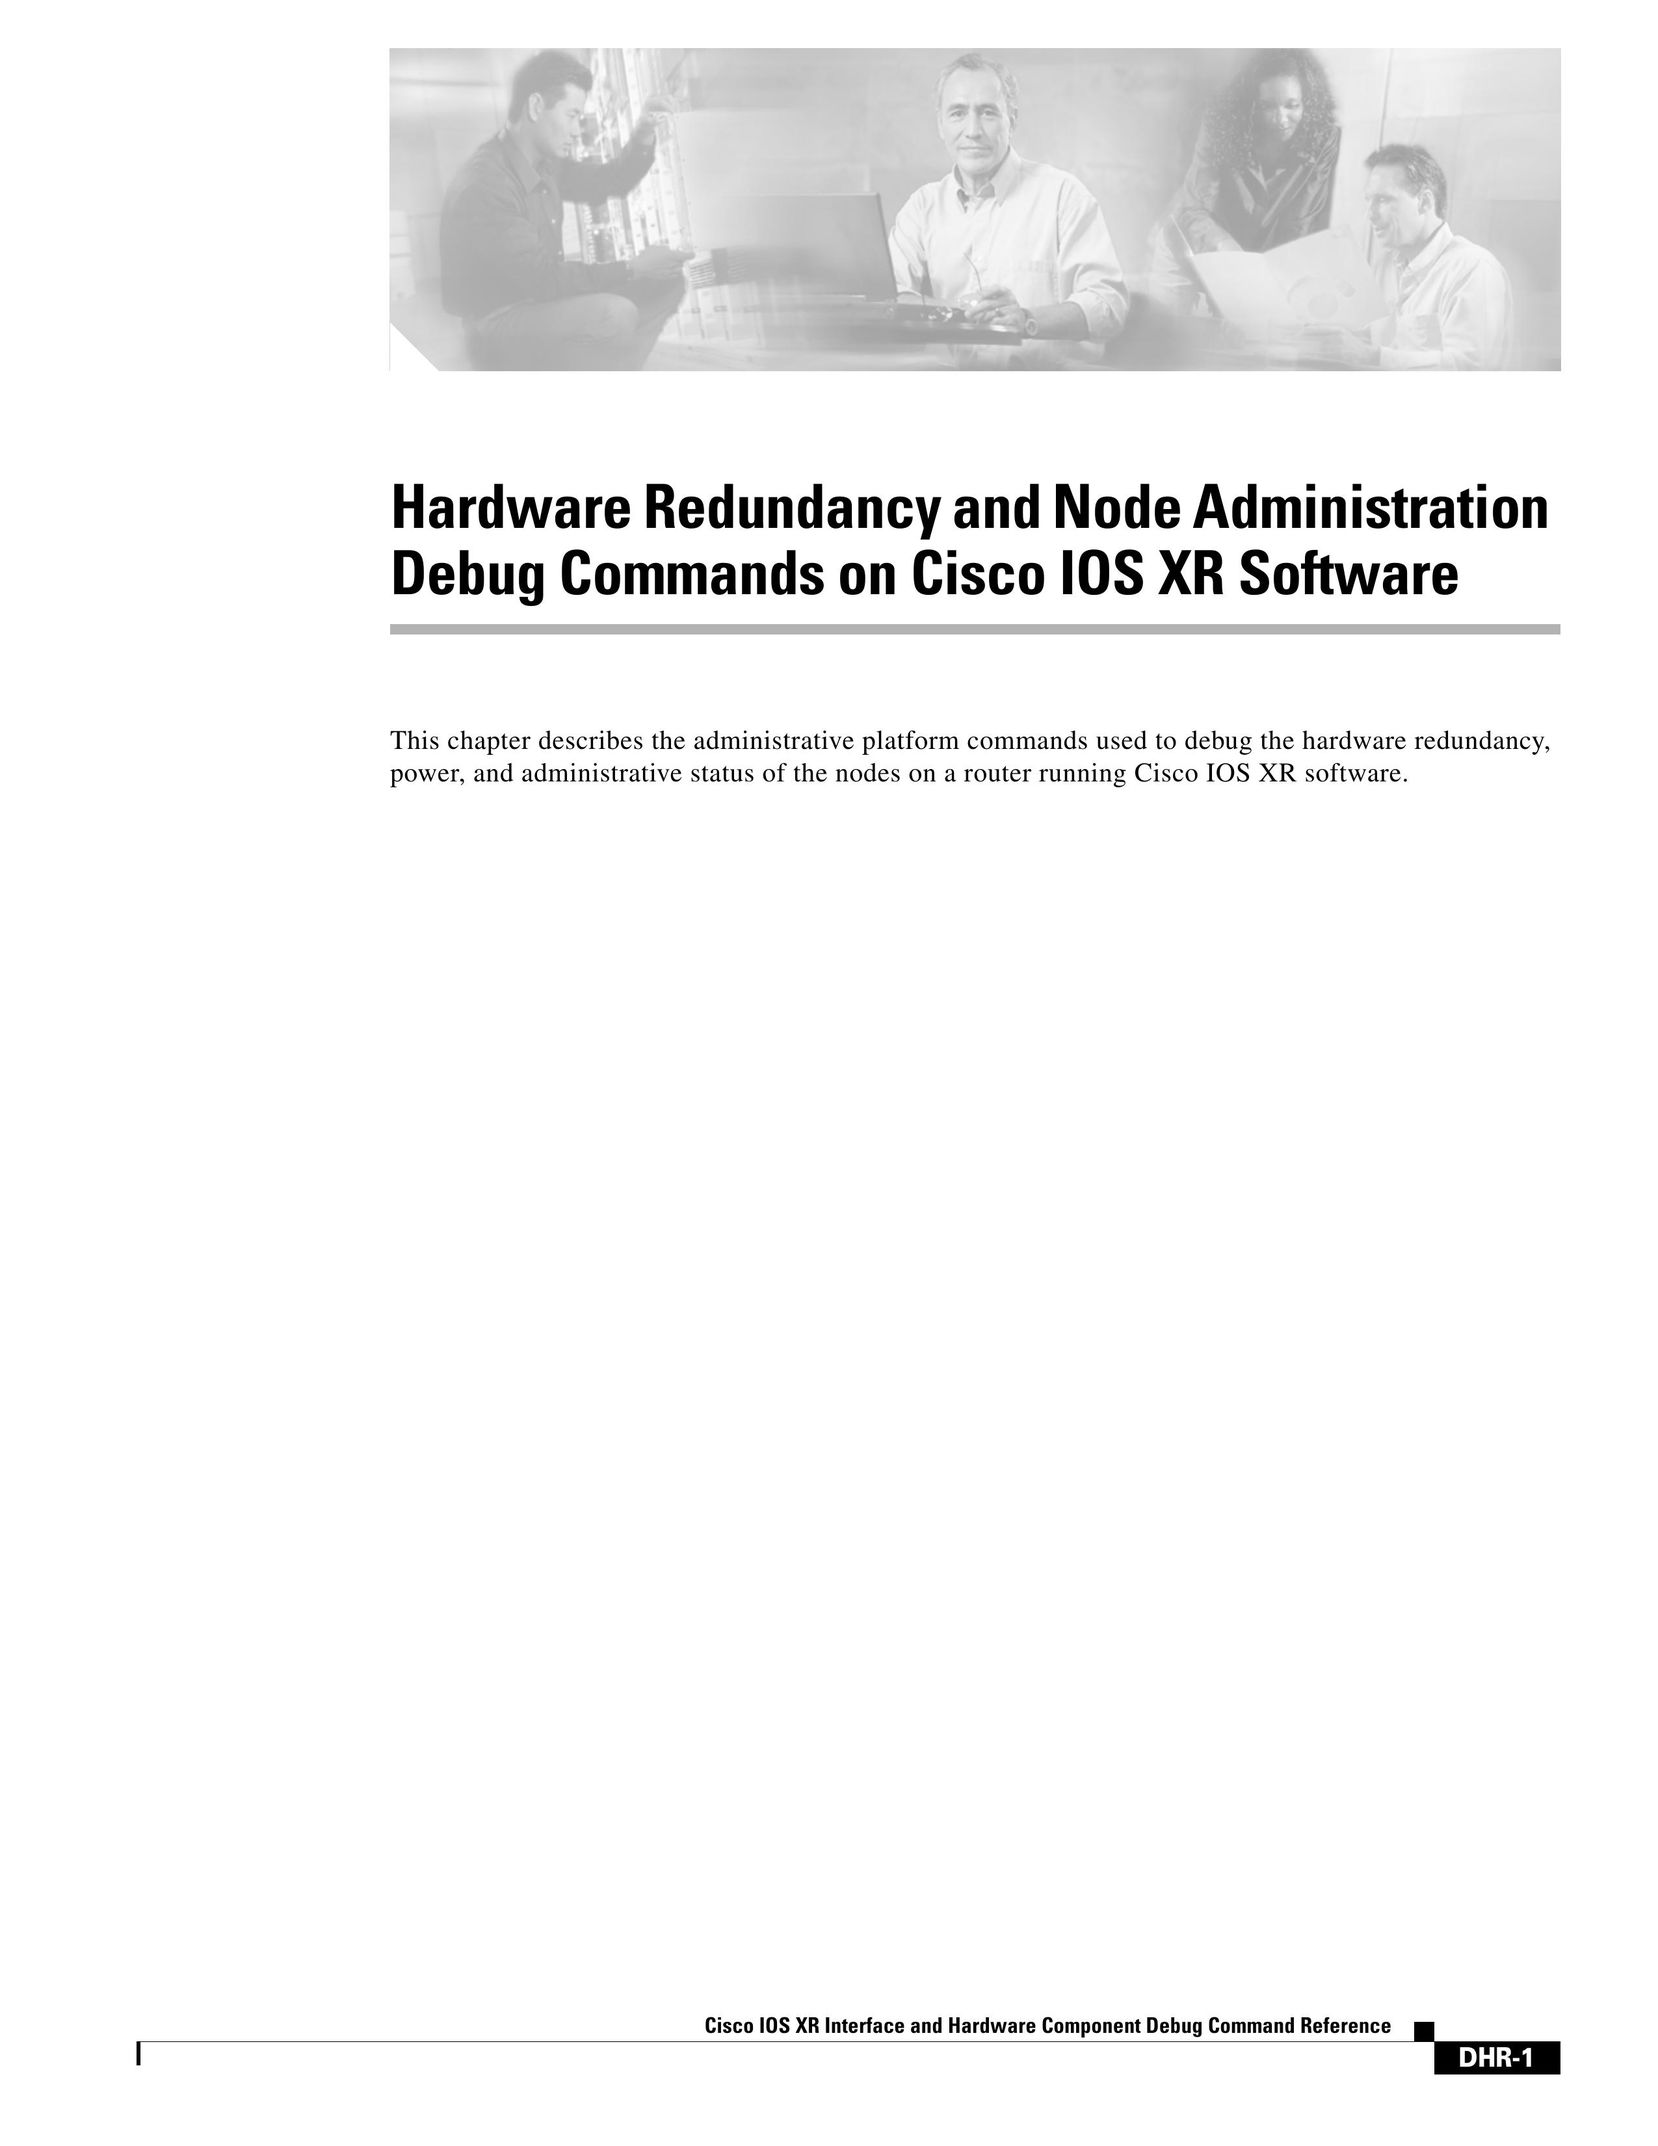 Cisco Systems DHR-1 Model Vehicle User Manual (Page 1)